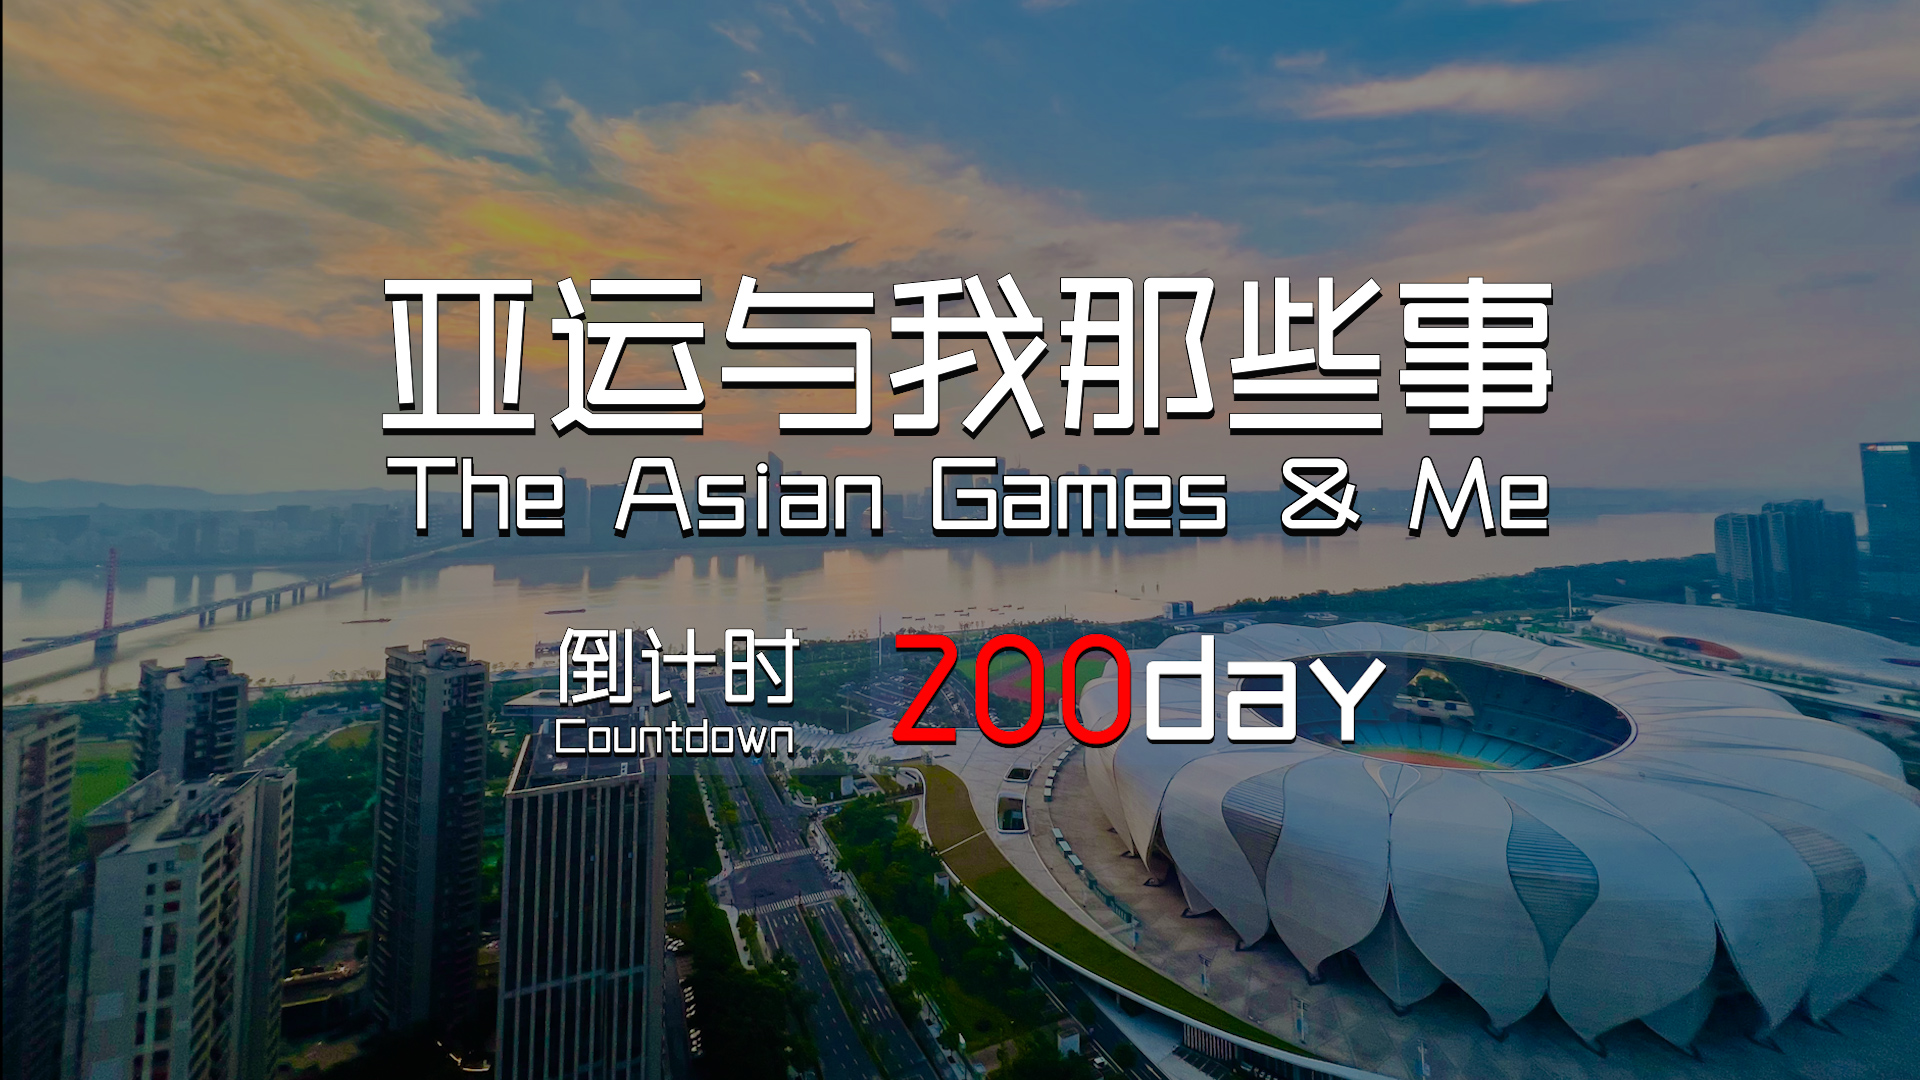 The Asian Games and Me: 200-day countdown